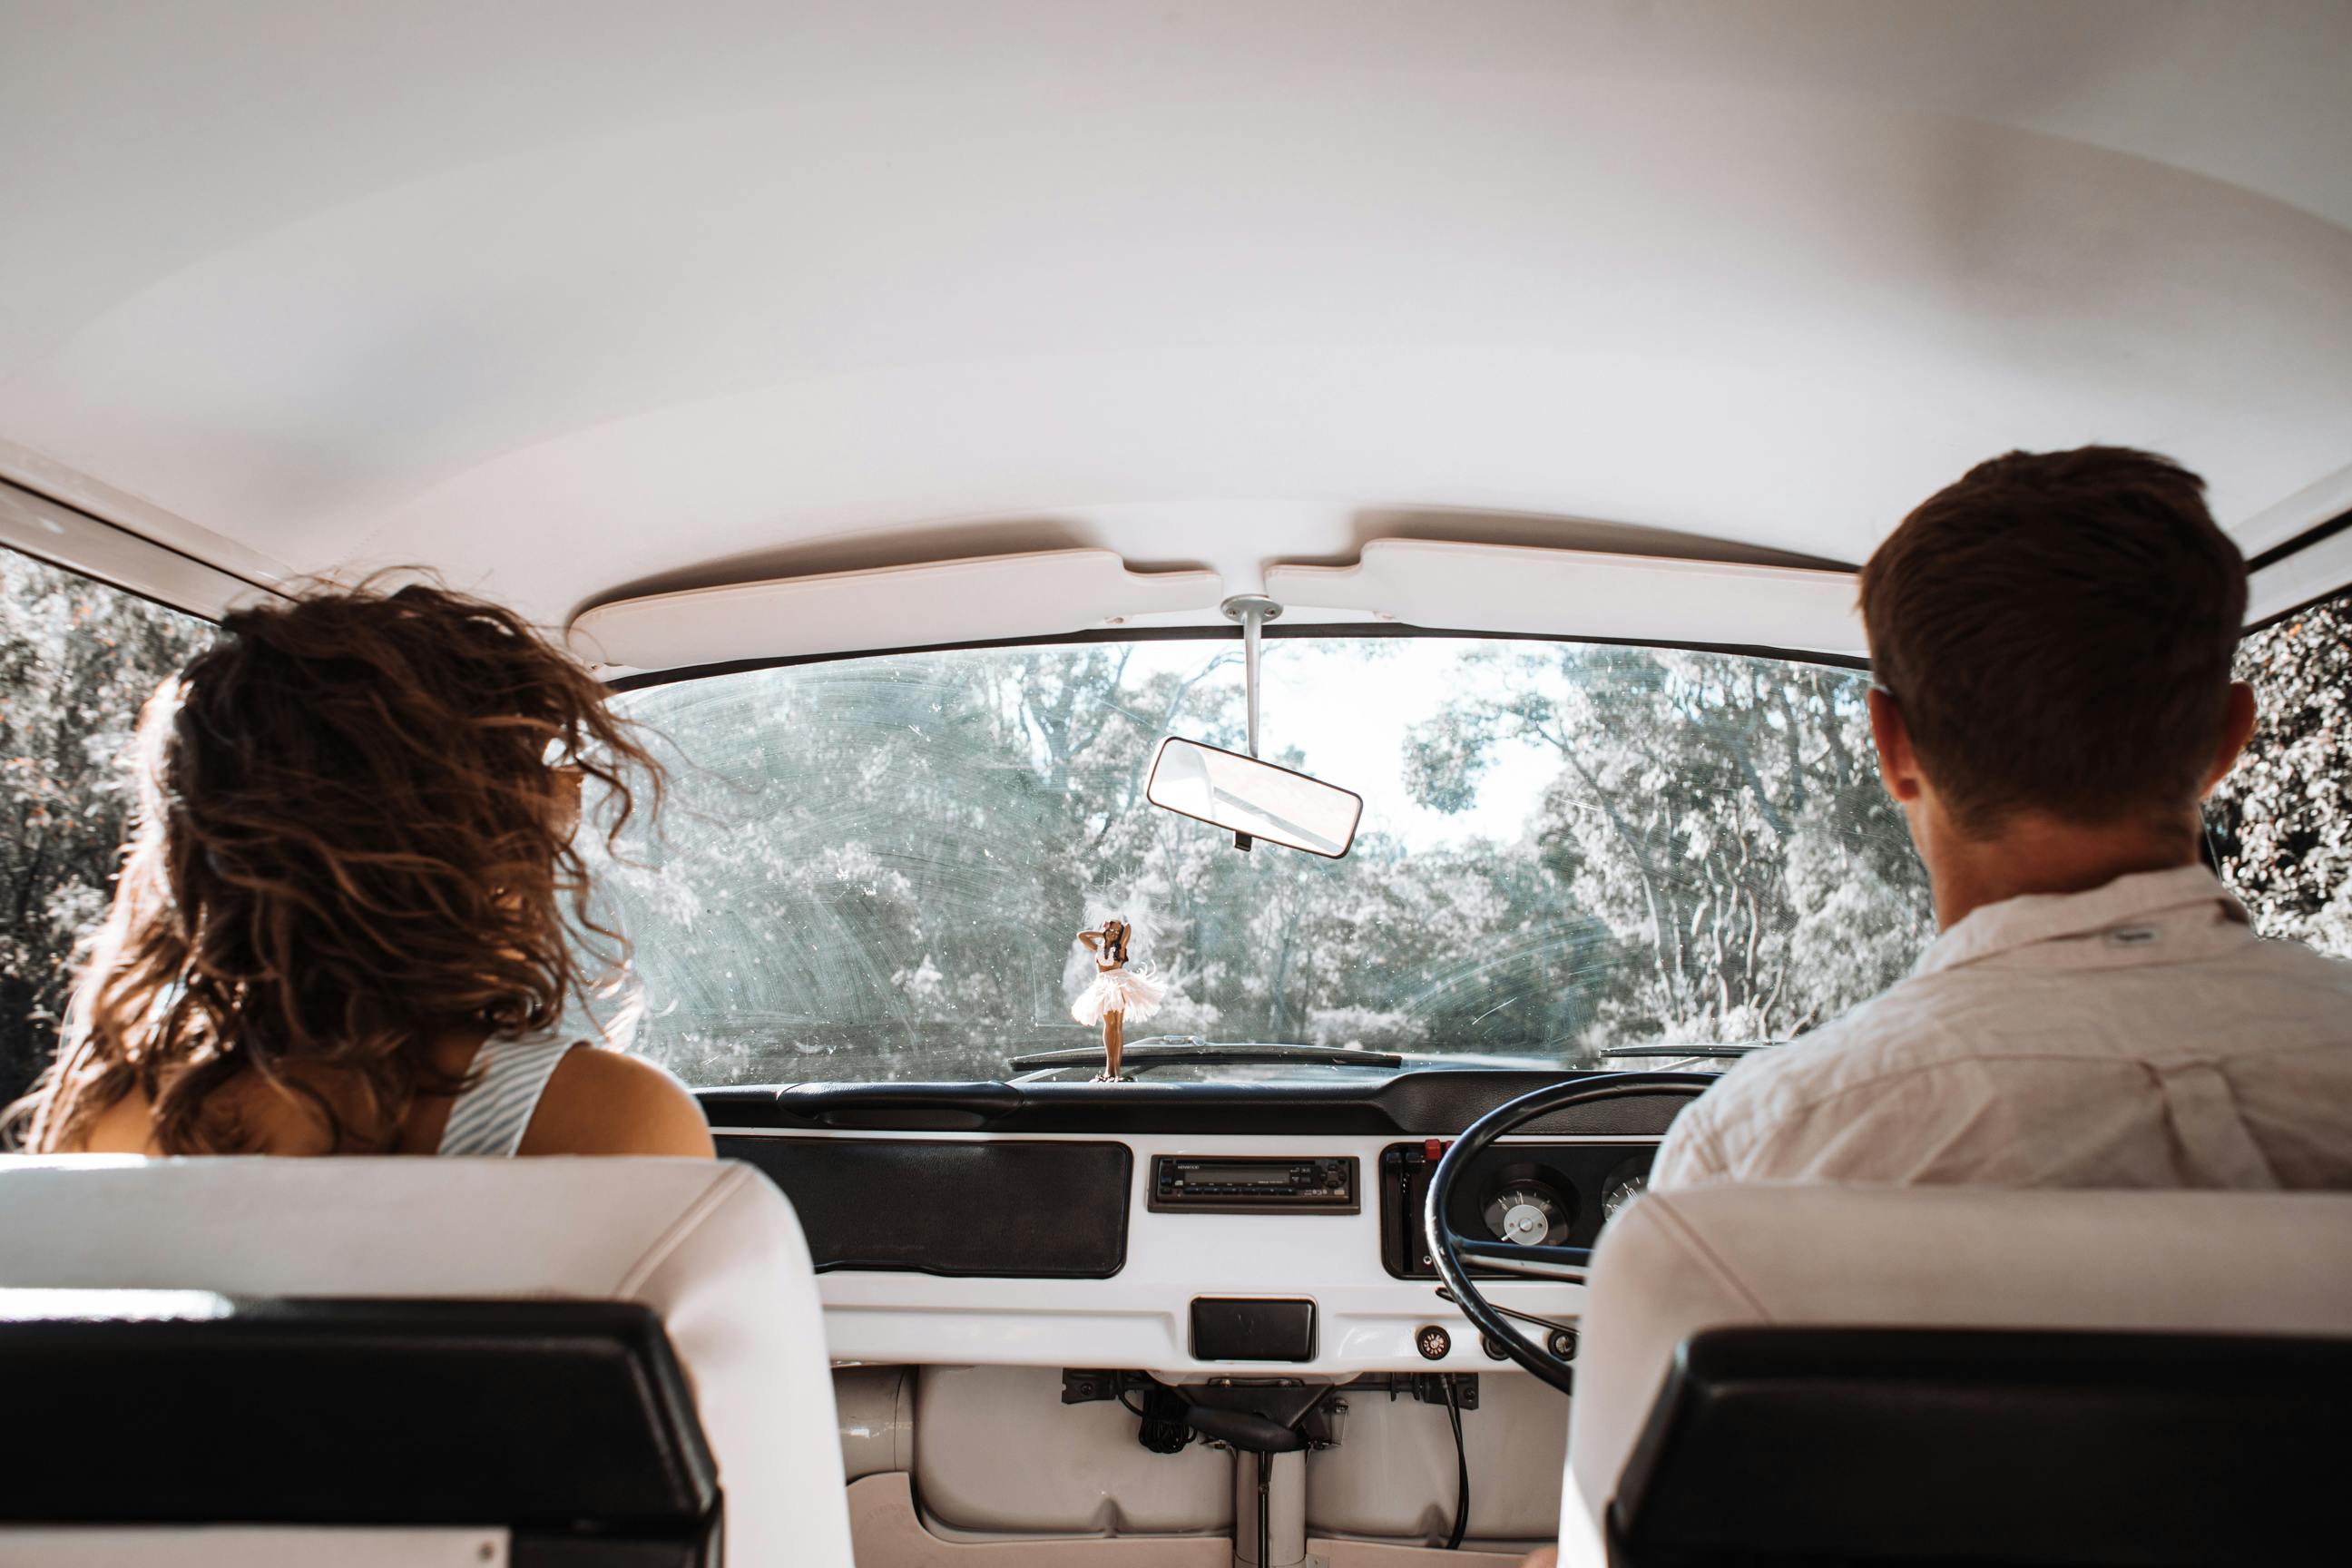 A couple driving | Source: Pexels